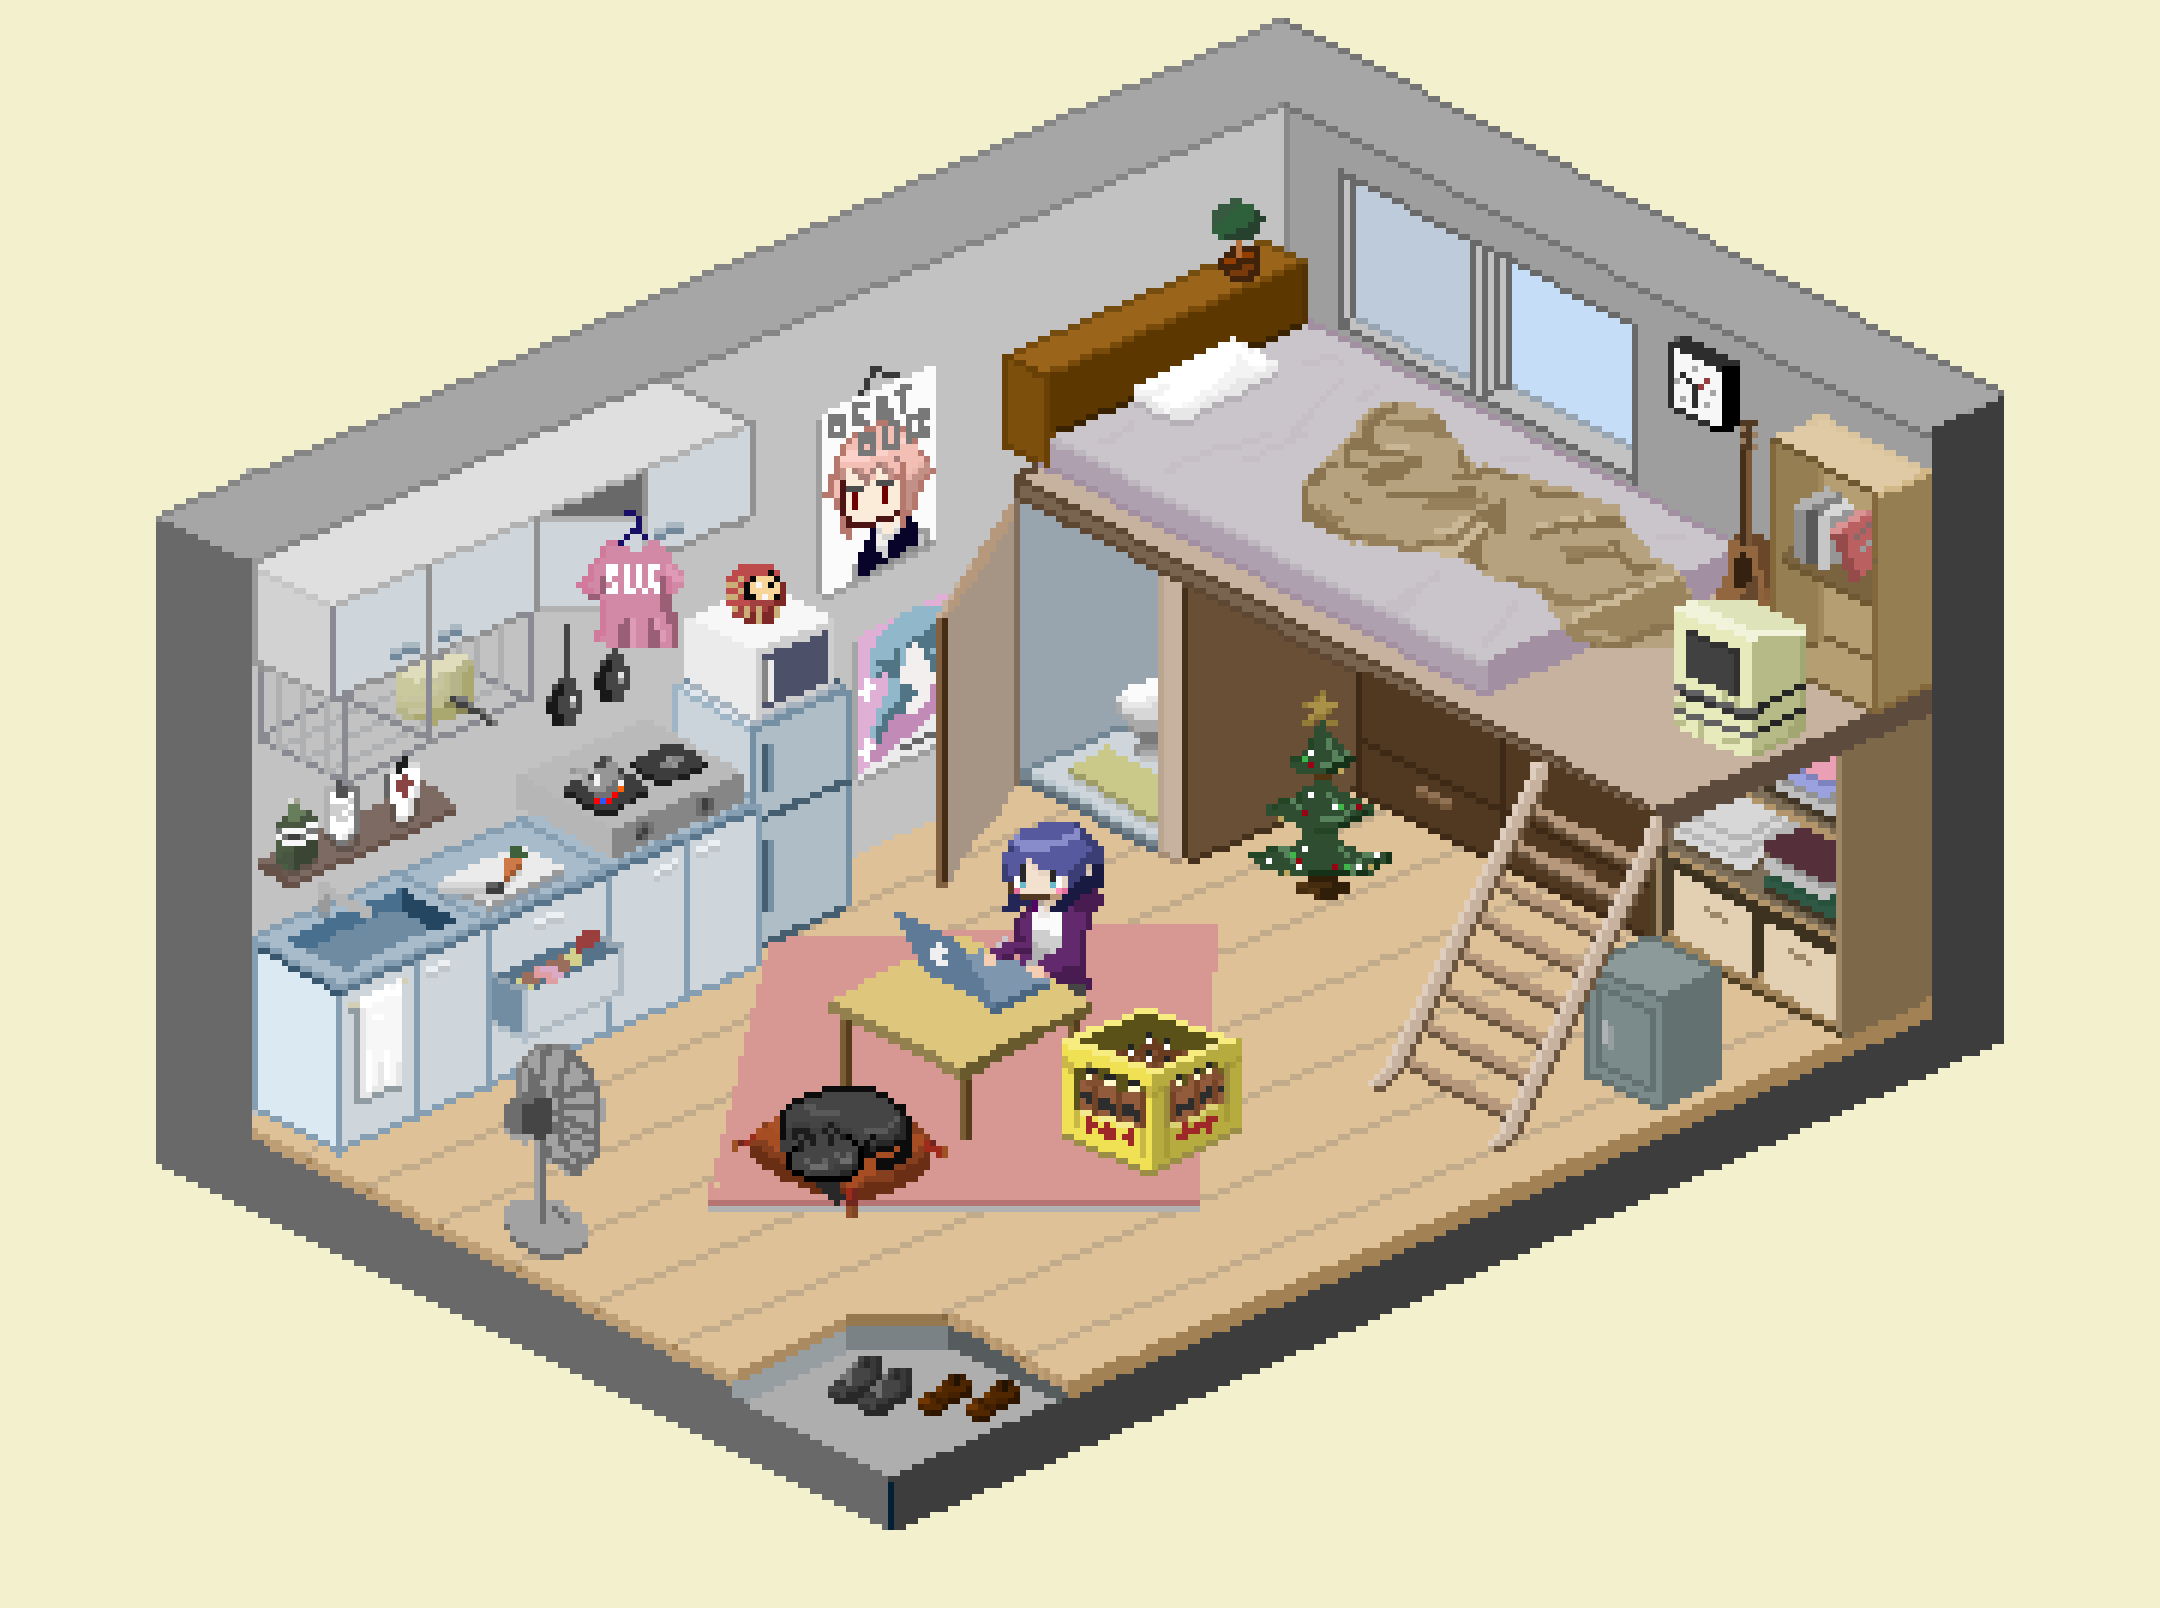 images/others/illust/2020_05_15-room.png